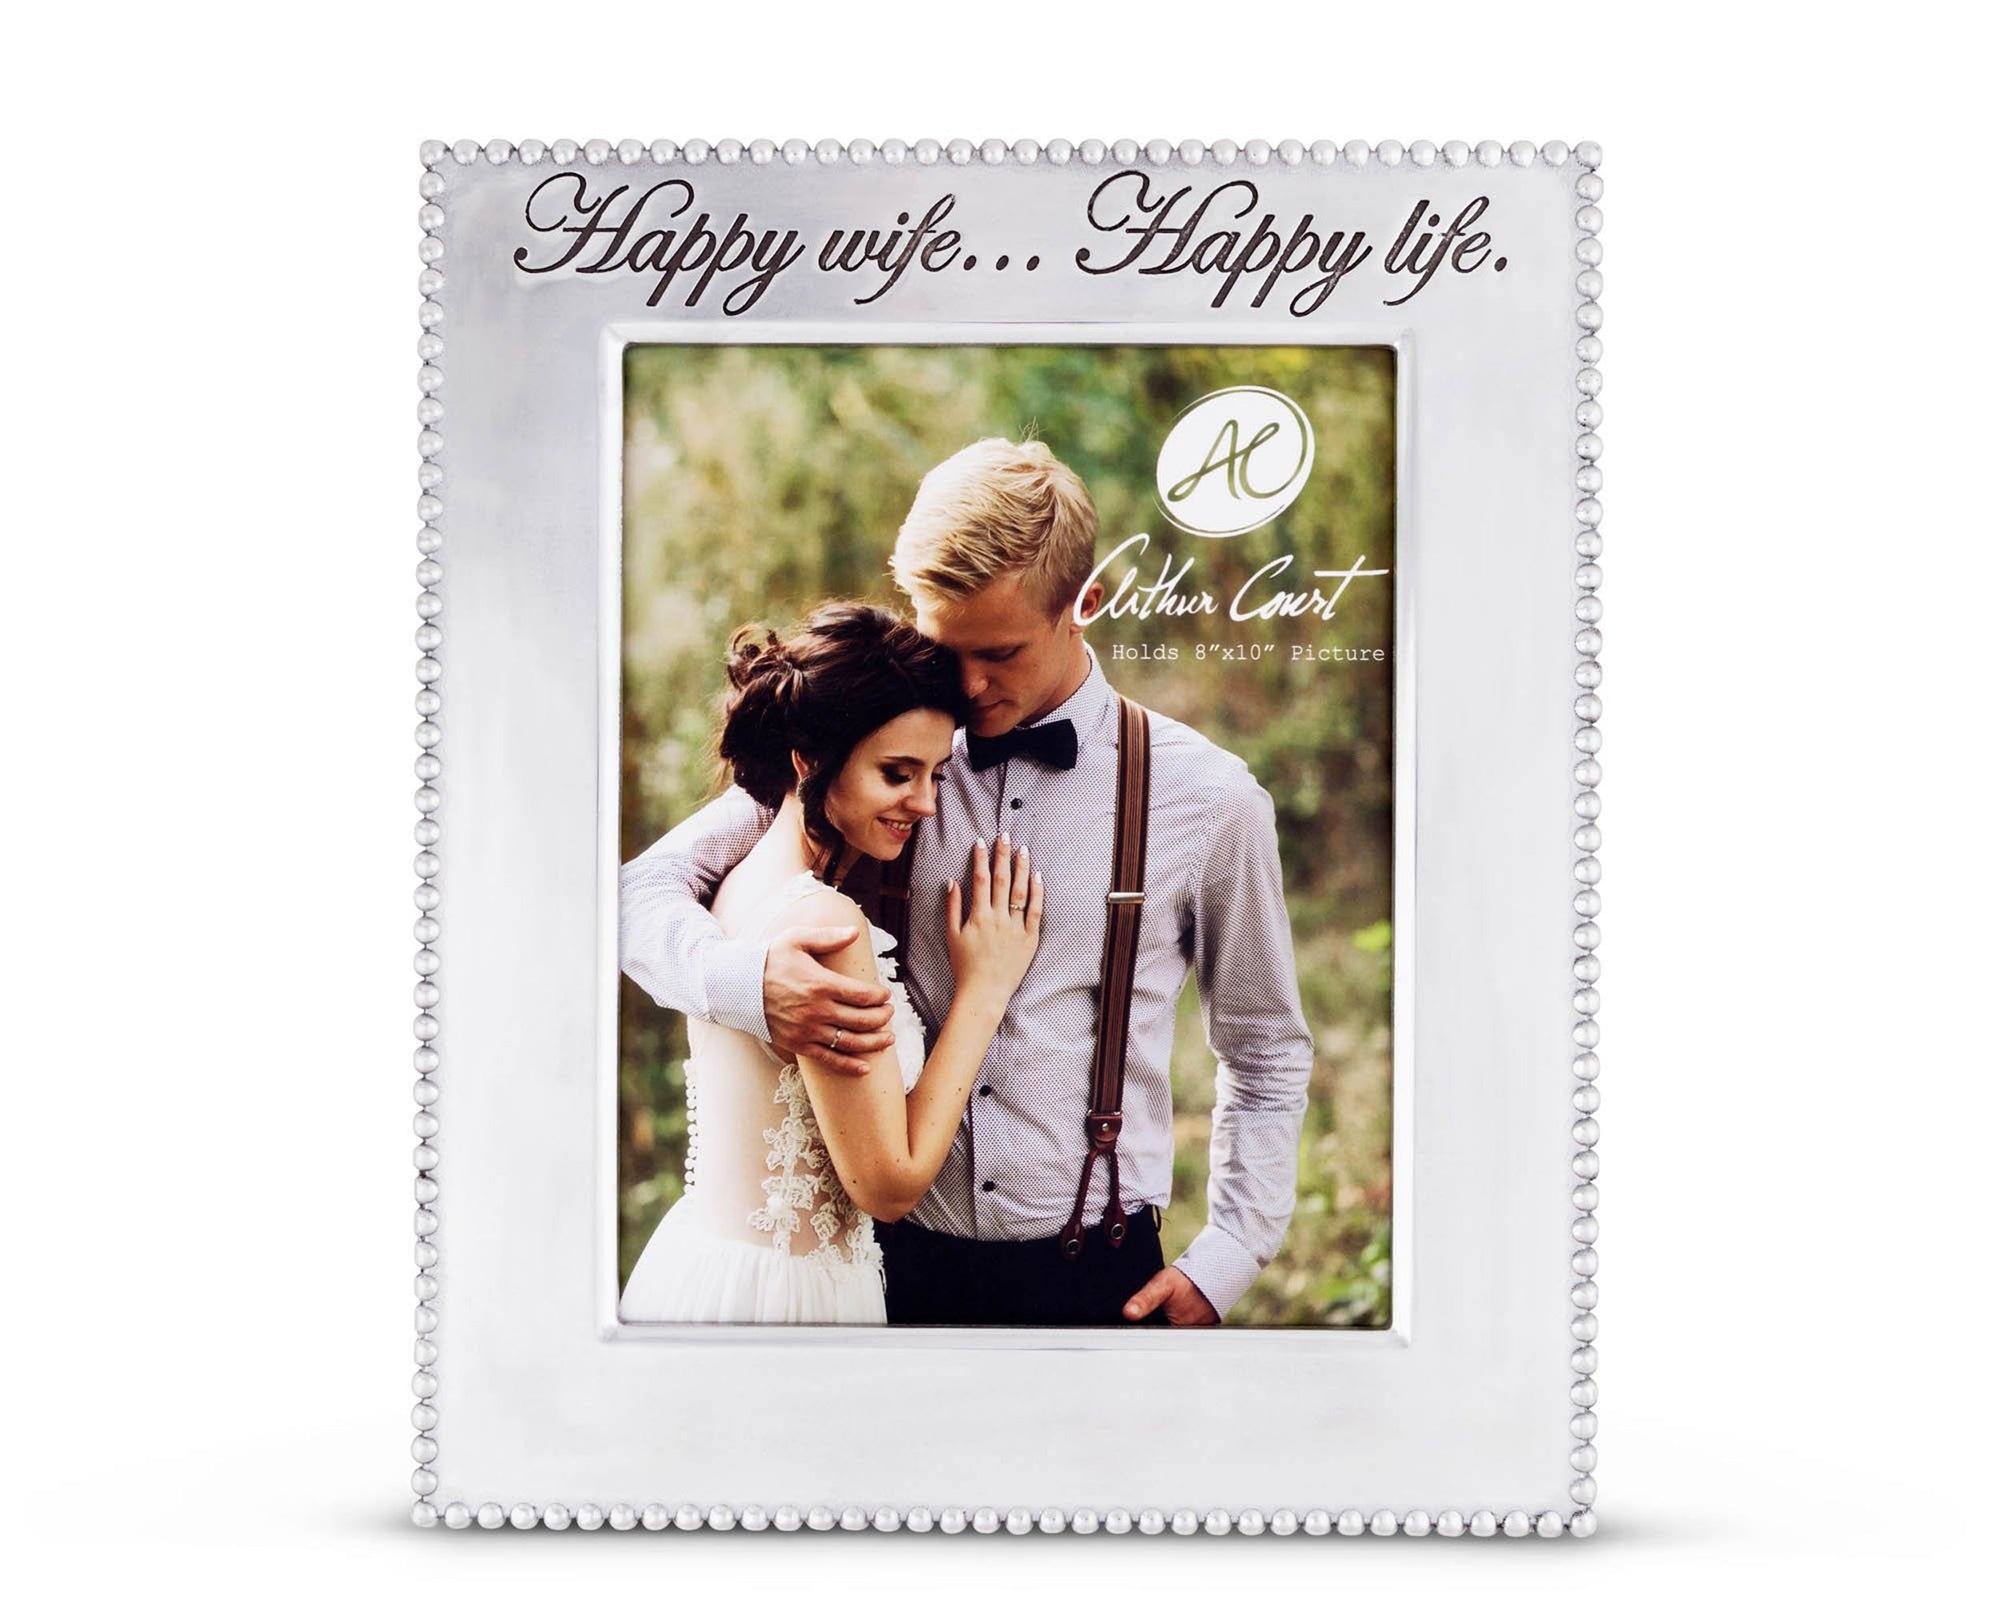 Beaded Polished Aluminum 'Happy Wife Happy Life' Picture Frame by Arthur Court Designs 8 x 10 Photo Frame Perfect wedding gift / Valentine frame